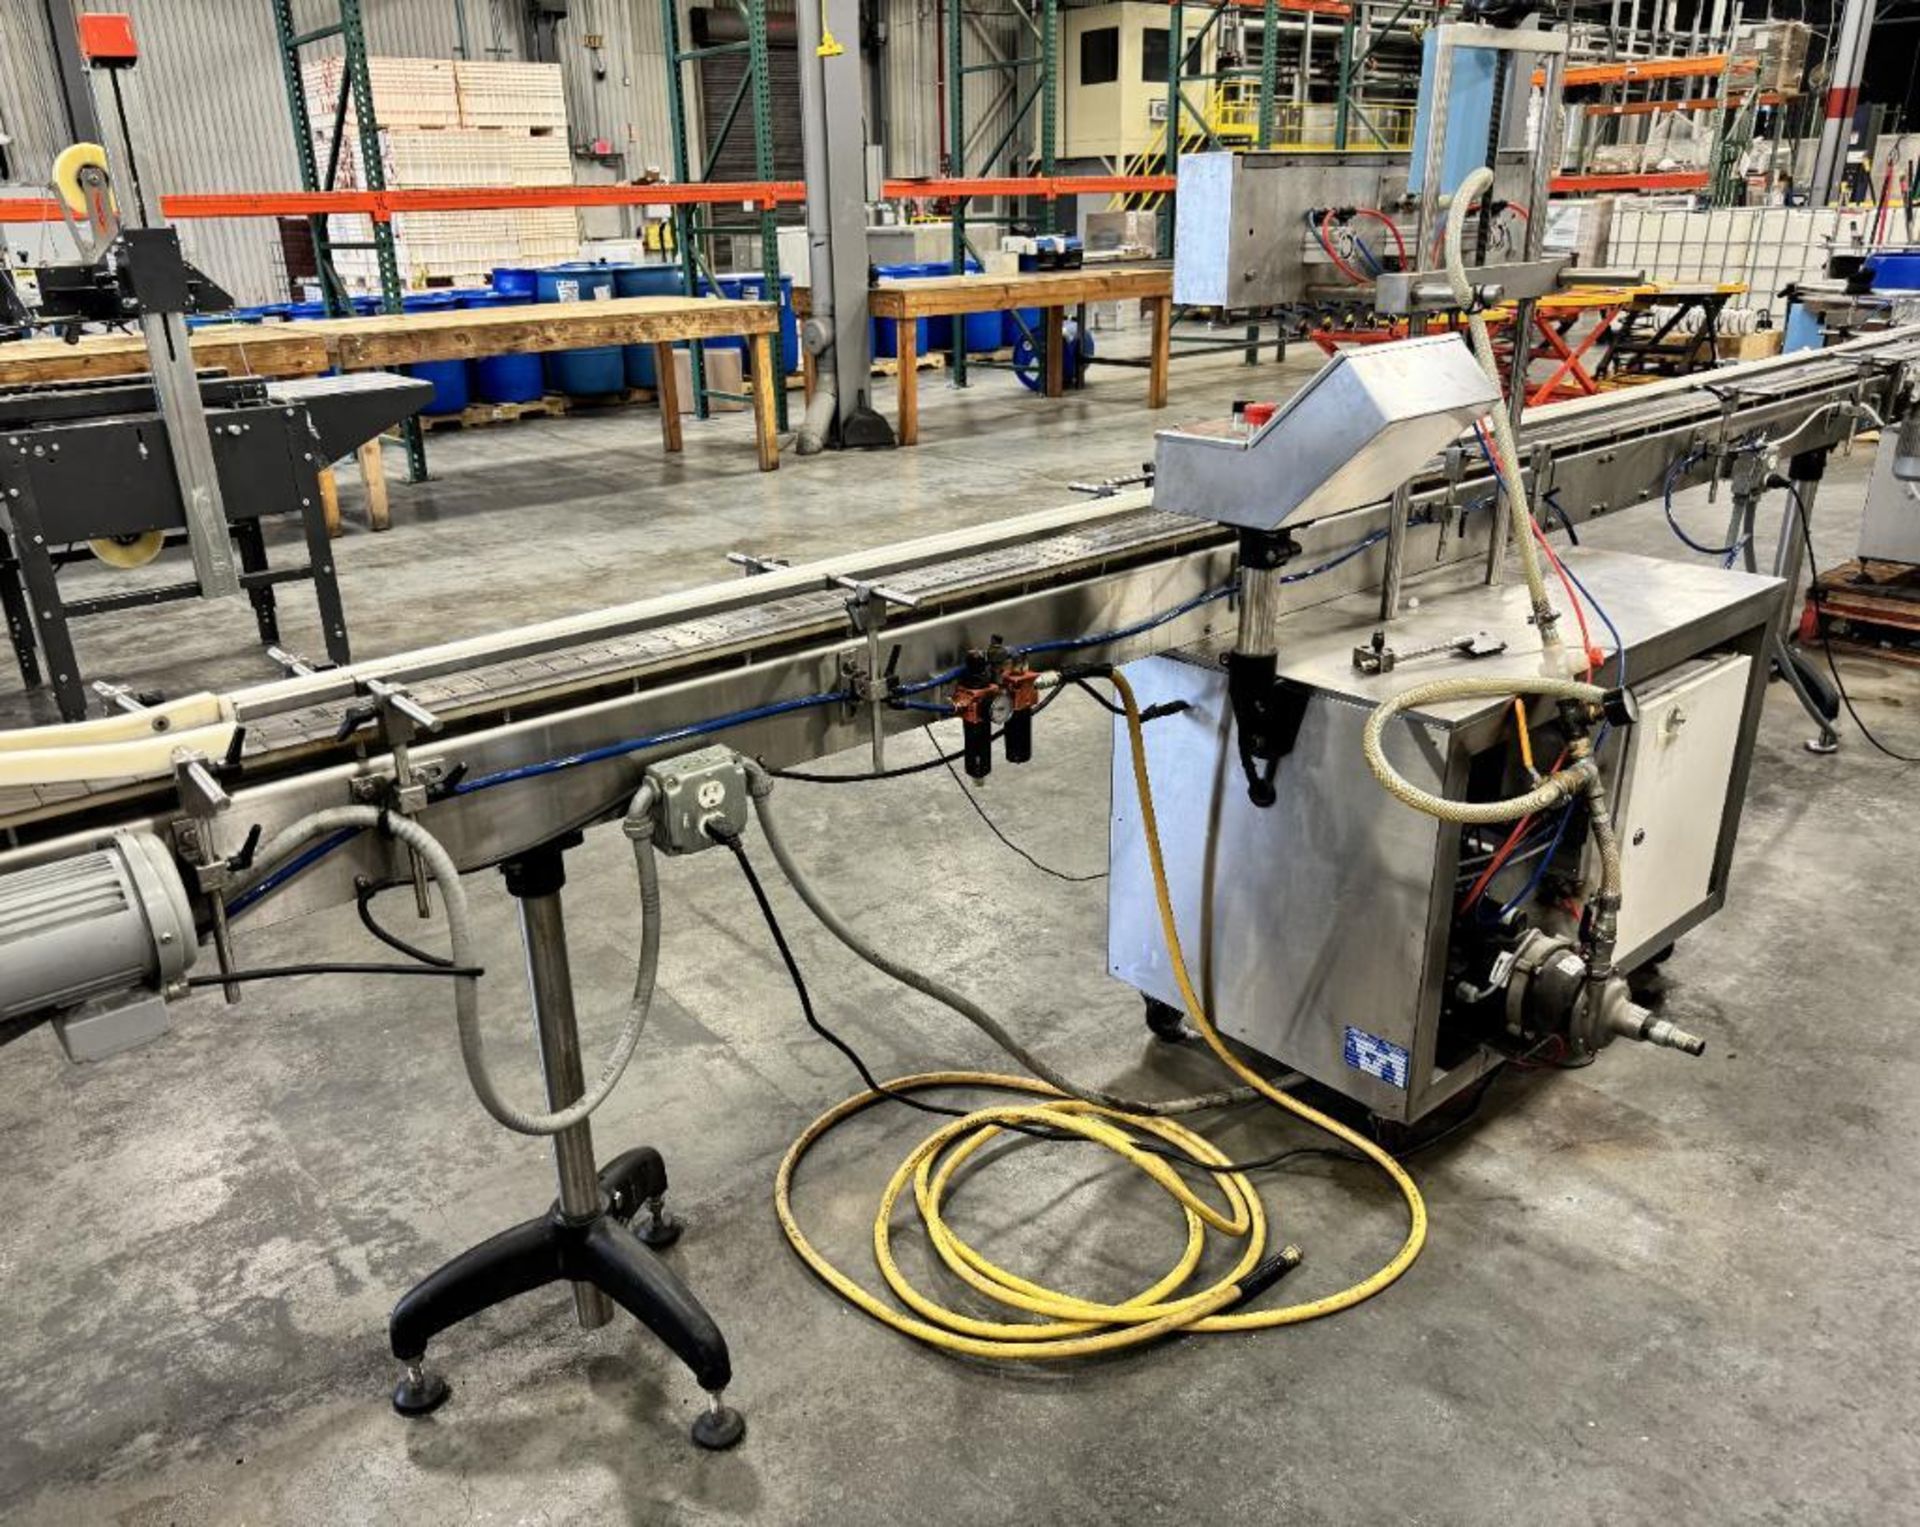 Accutek Packaging Equipment Auto Pinch Series (8) Nozzle Filler, Model 00-550-000, Serial# A-17-2052 - Image 7 of 11